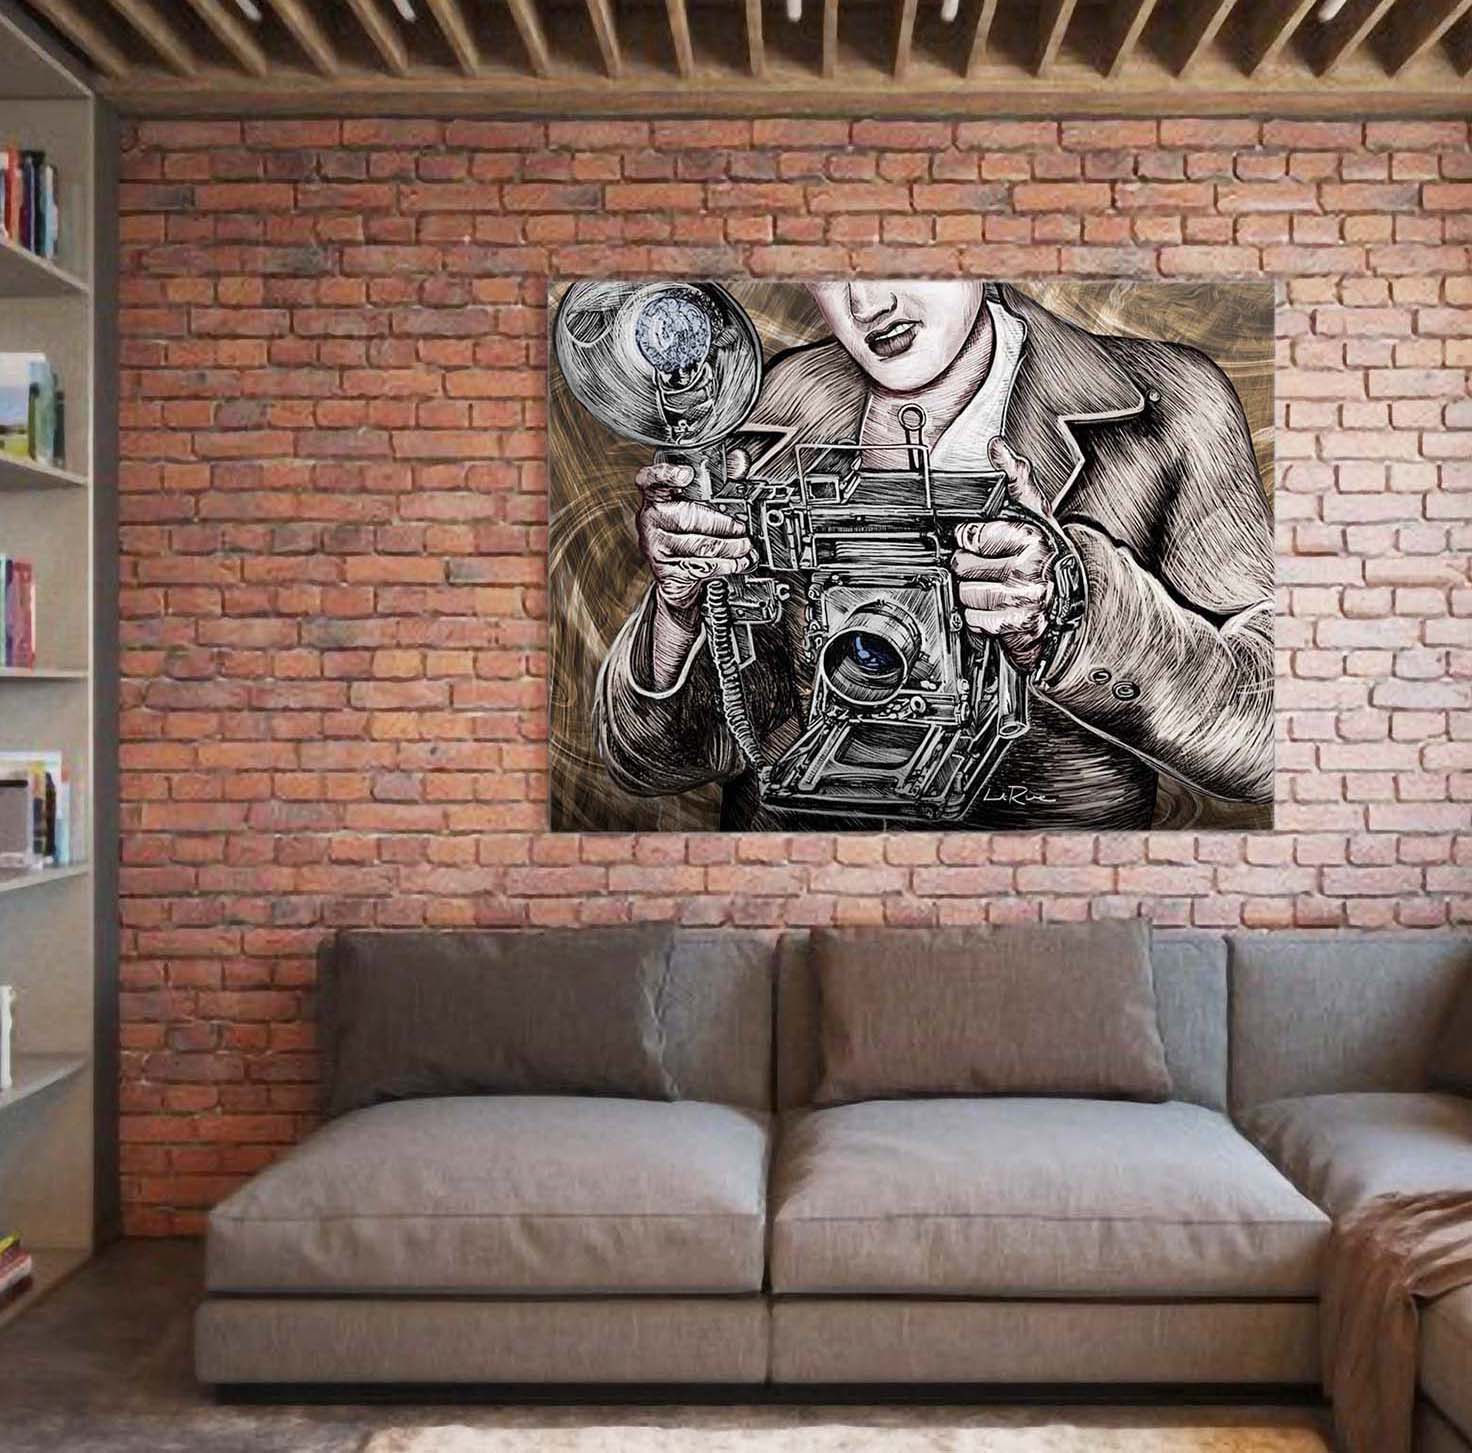 Camera King mixed media ink by Doug LaRue on a wall in a living room over couch